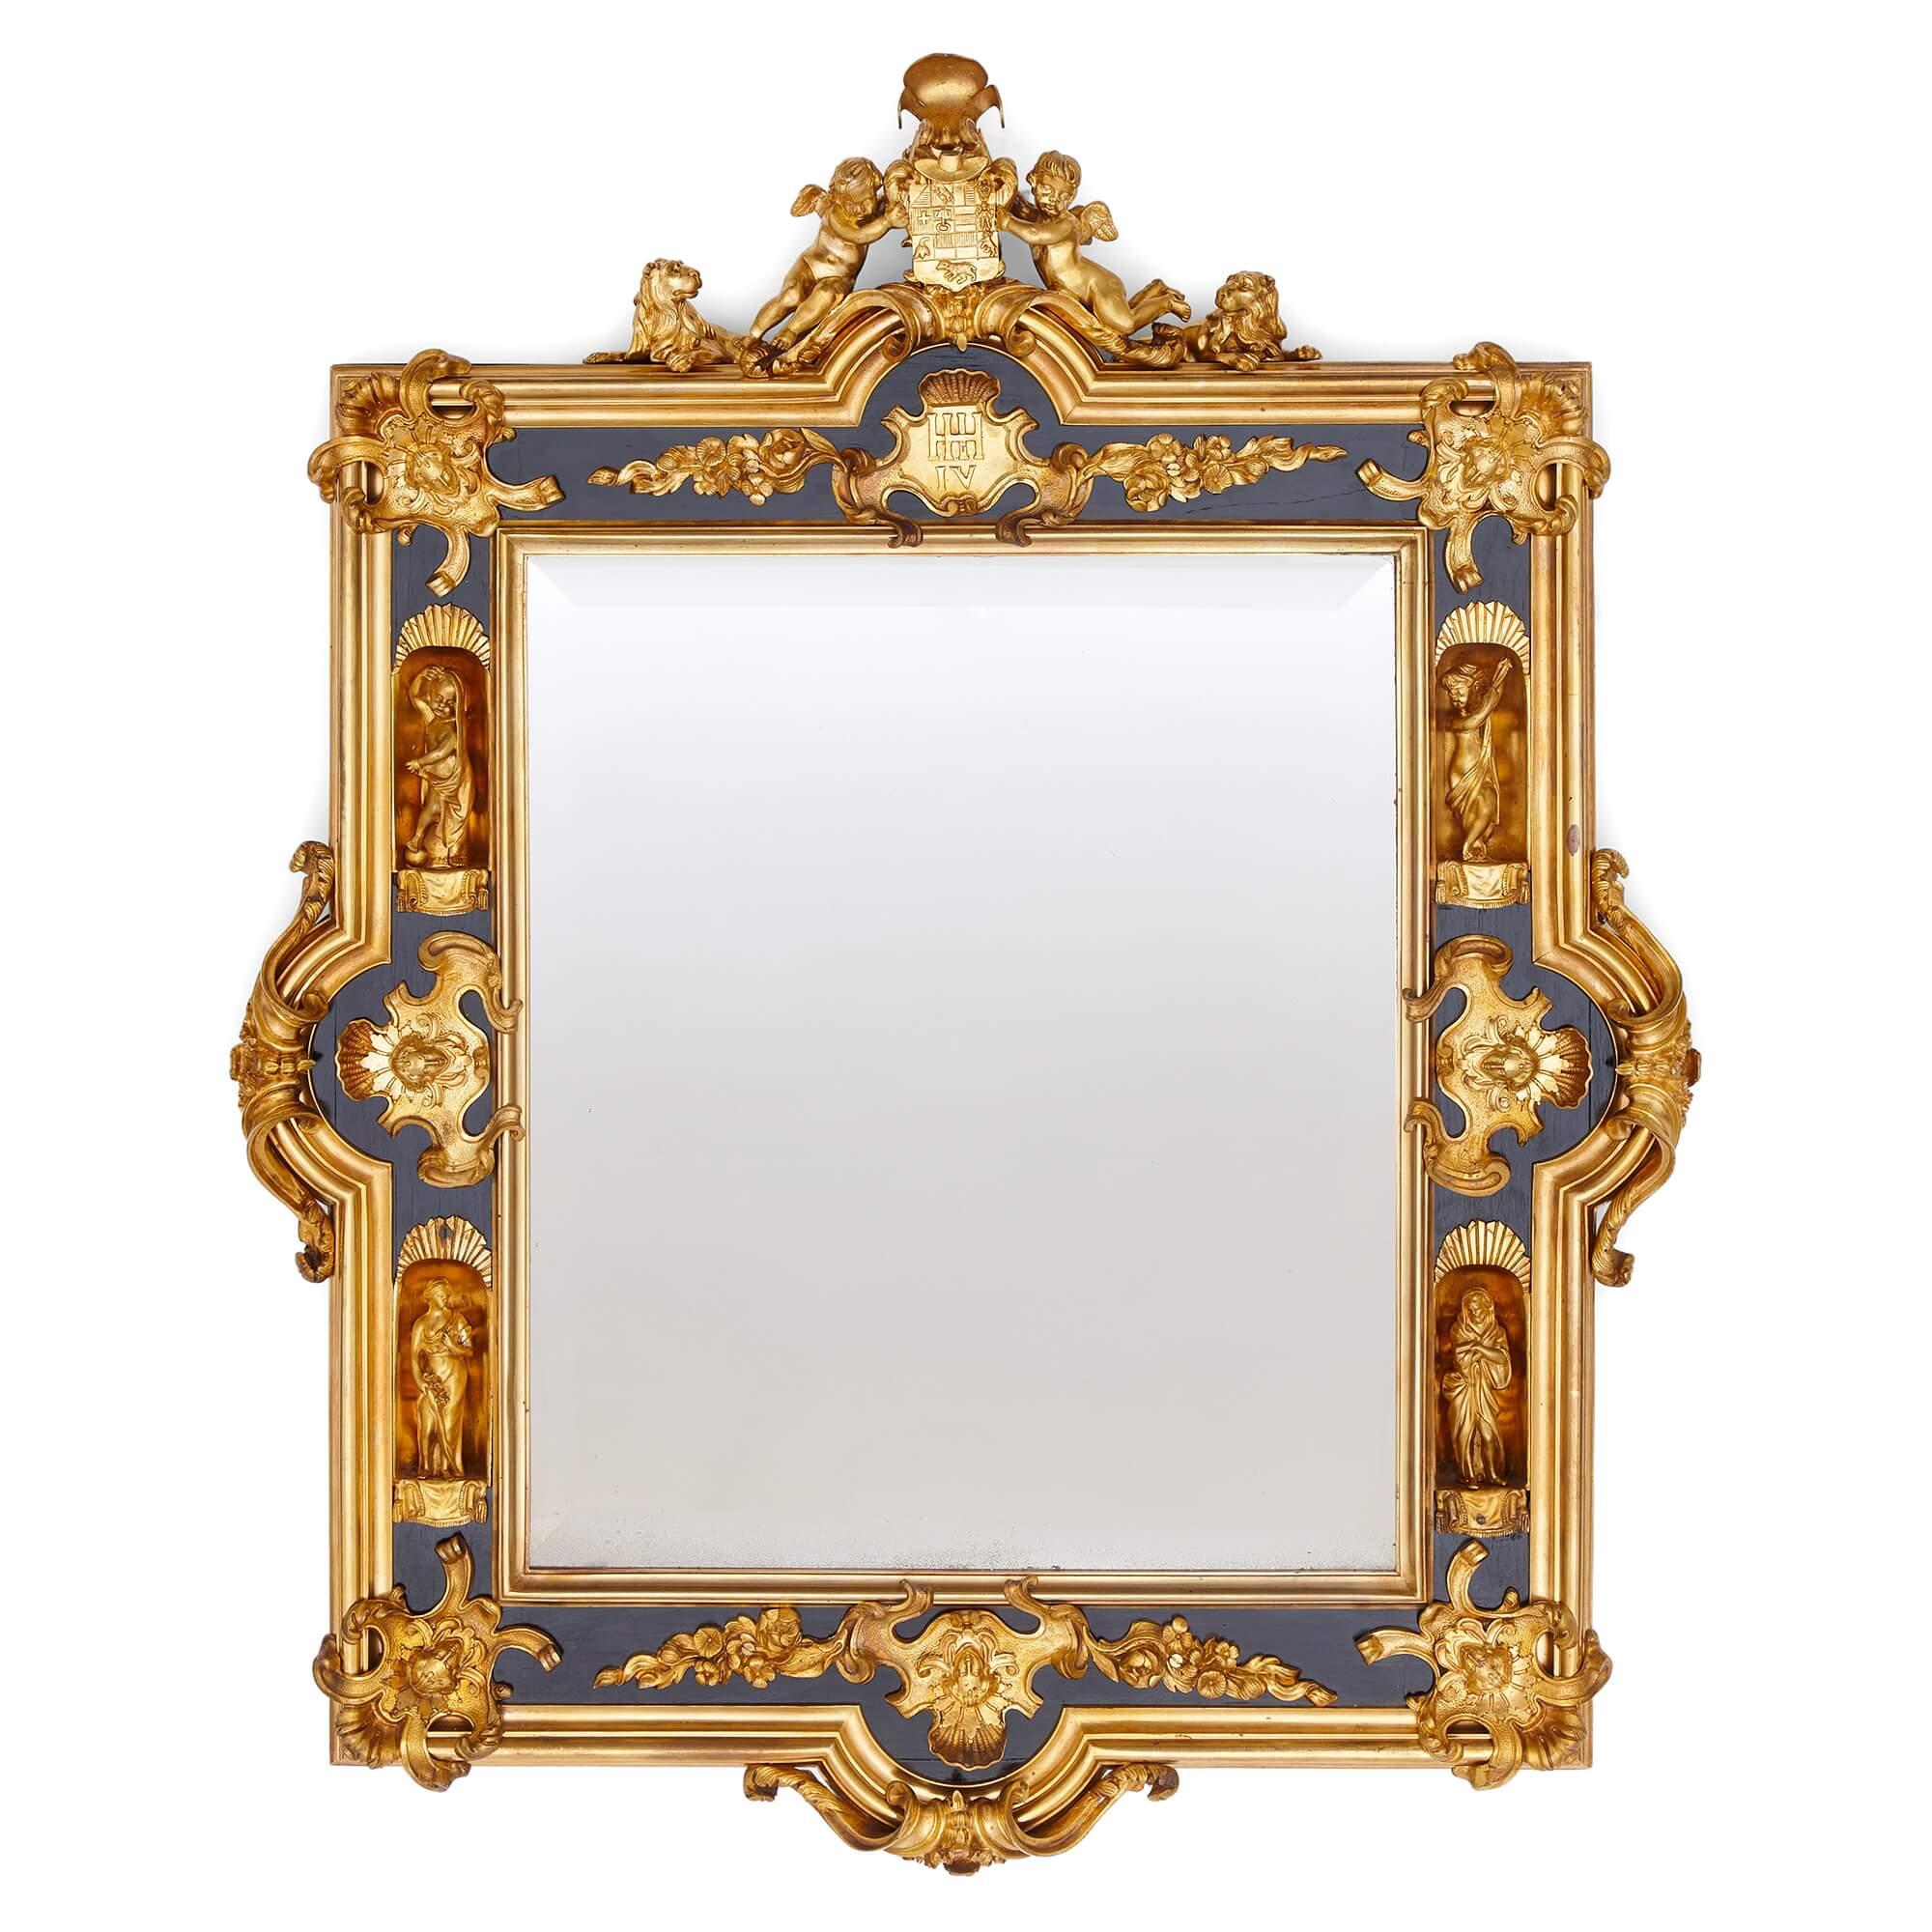 Pair of English gilt bronze and ebonised wood mirrors 
English, c. 1860
Height 74cm, width 59cm, depth 7cm 

Magnificently crafted in around 1860 by English craftsmen, this pair of mirrors is decorated with several motifs, some inspired by French